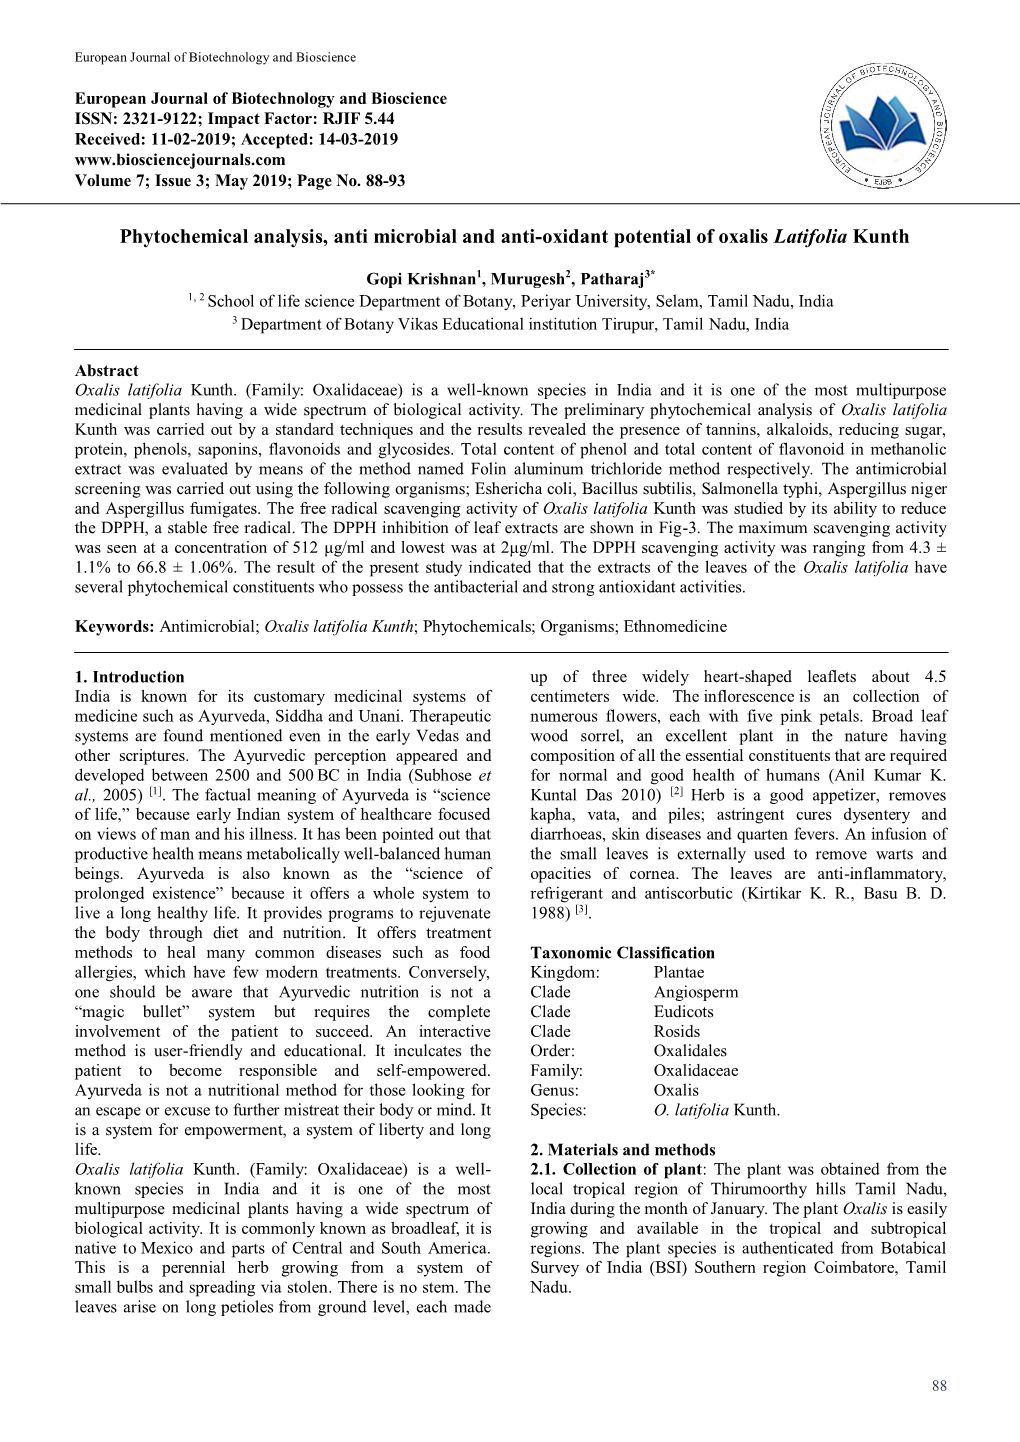 Phytochemical Analysis, Anti Microbial and Anti-Oxidant Potential of Oxalis Latifolia Kunth